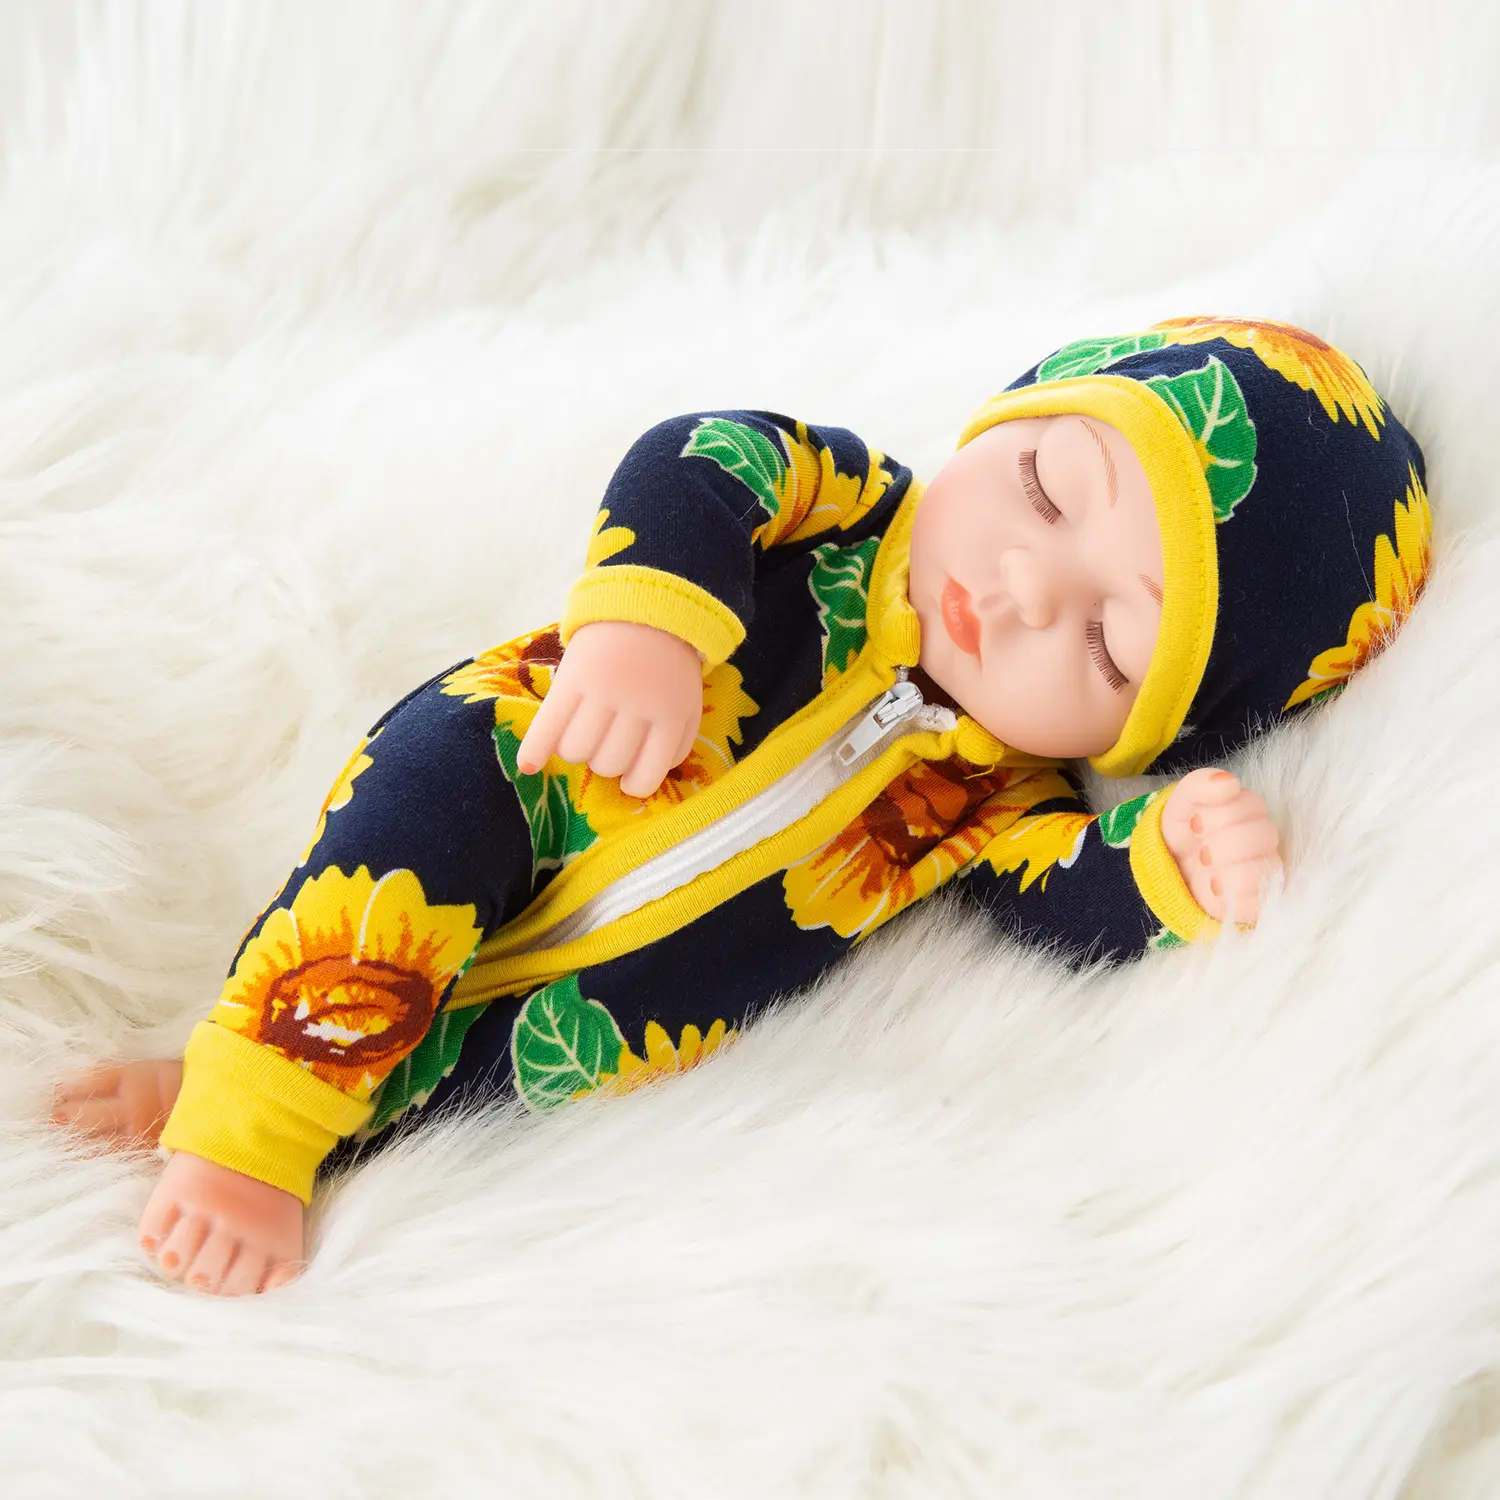 The Best And Cheapest Comfortable Doll Clothes 10 Inch Cute Baby Reborn Dolls Clothes Pajamas Dolls Accessories